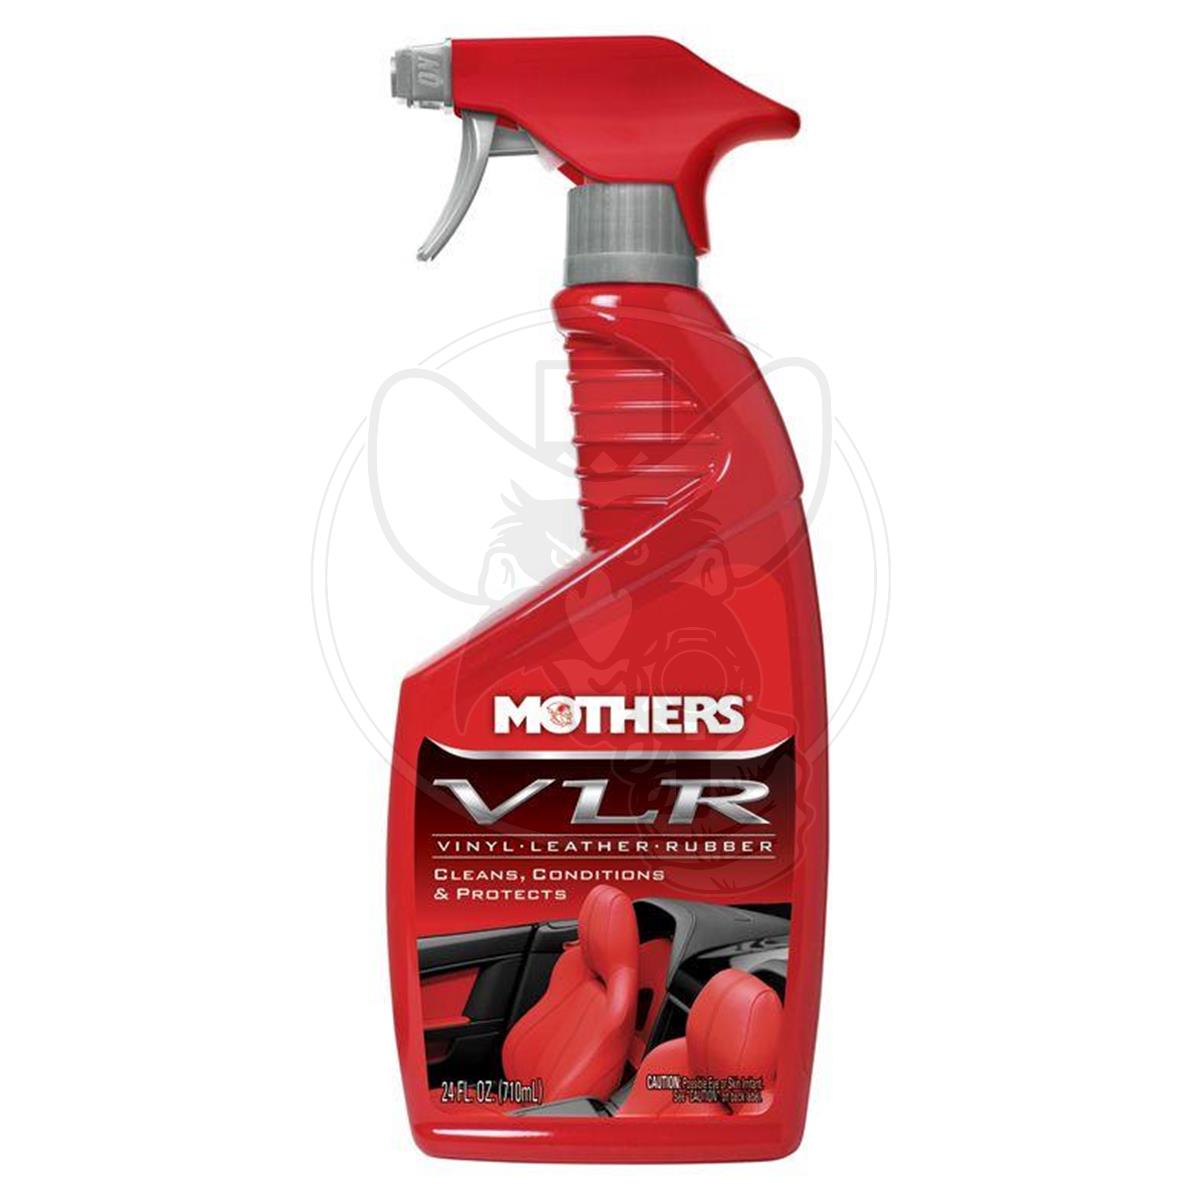 MOTHERS VLR VINYL-LEATHER-RUBBER CARE - 710ML